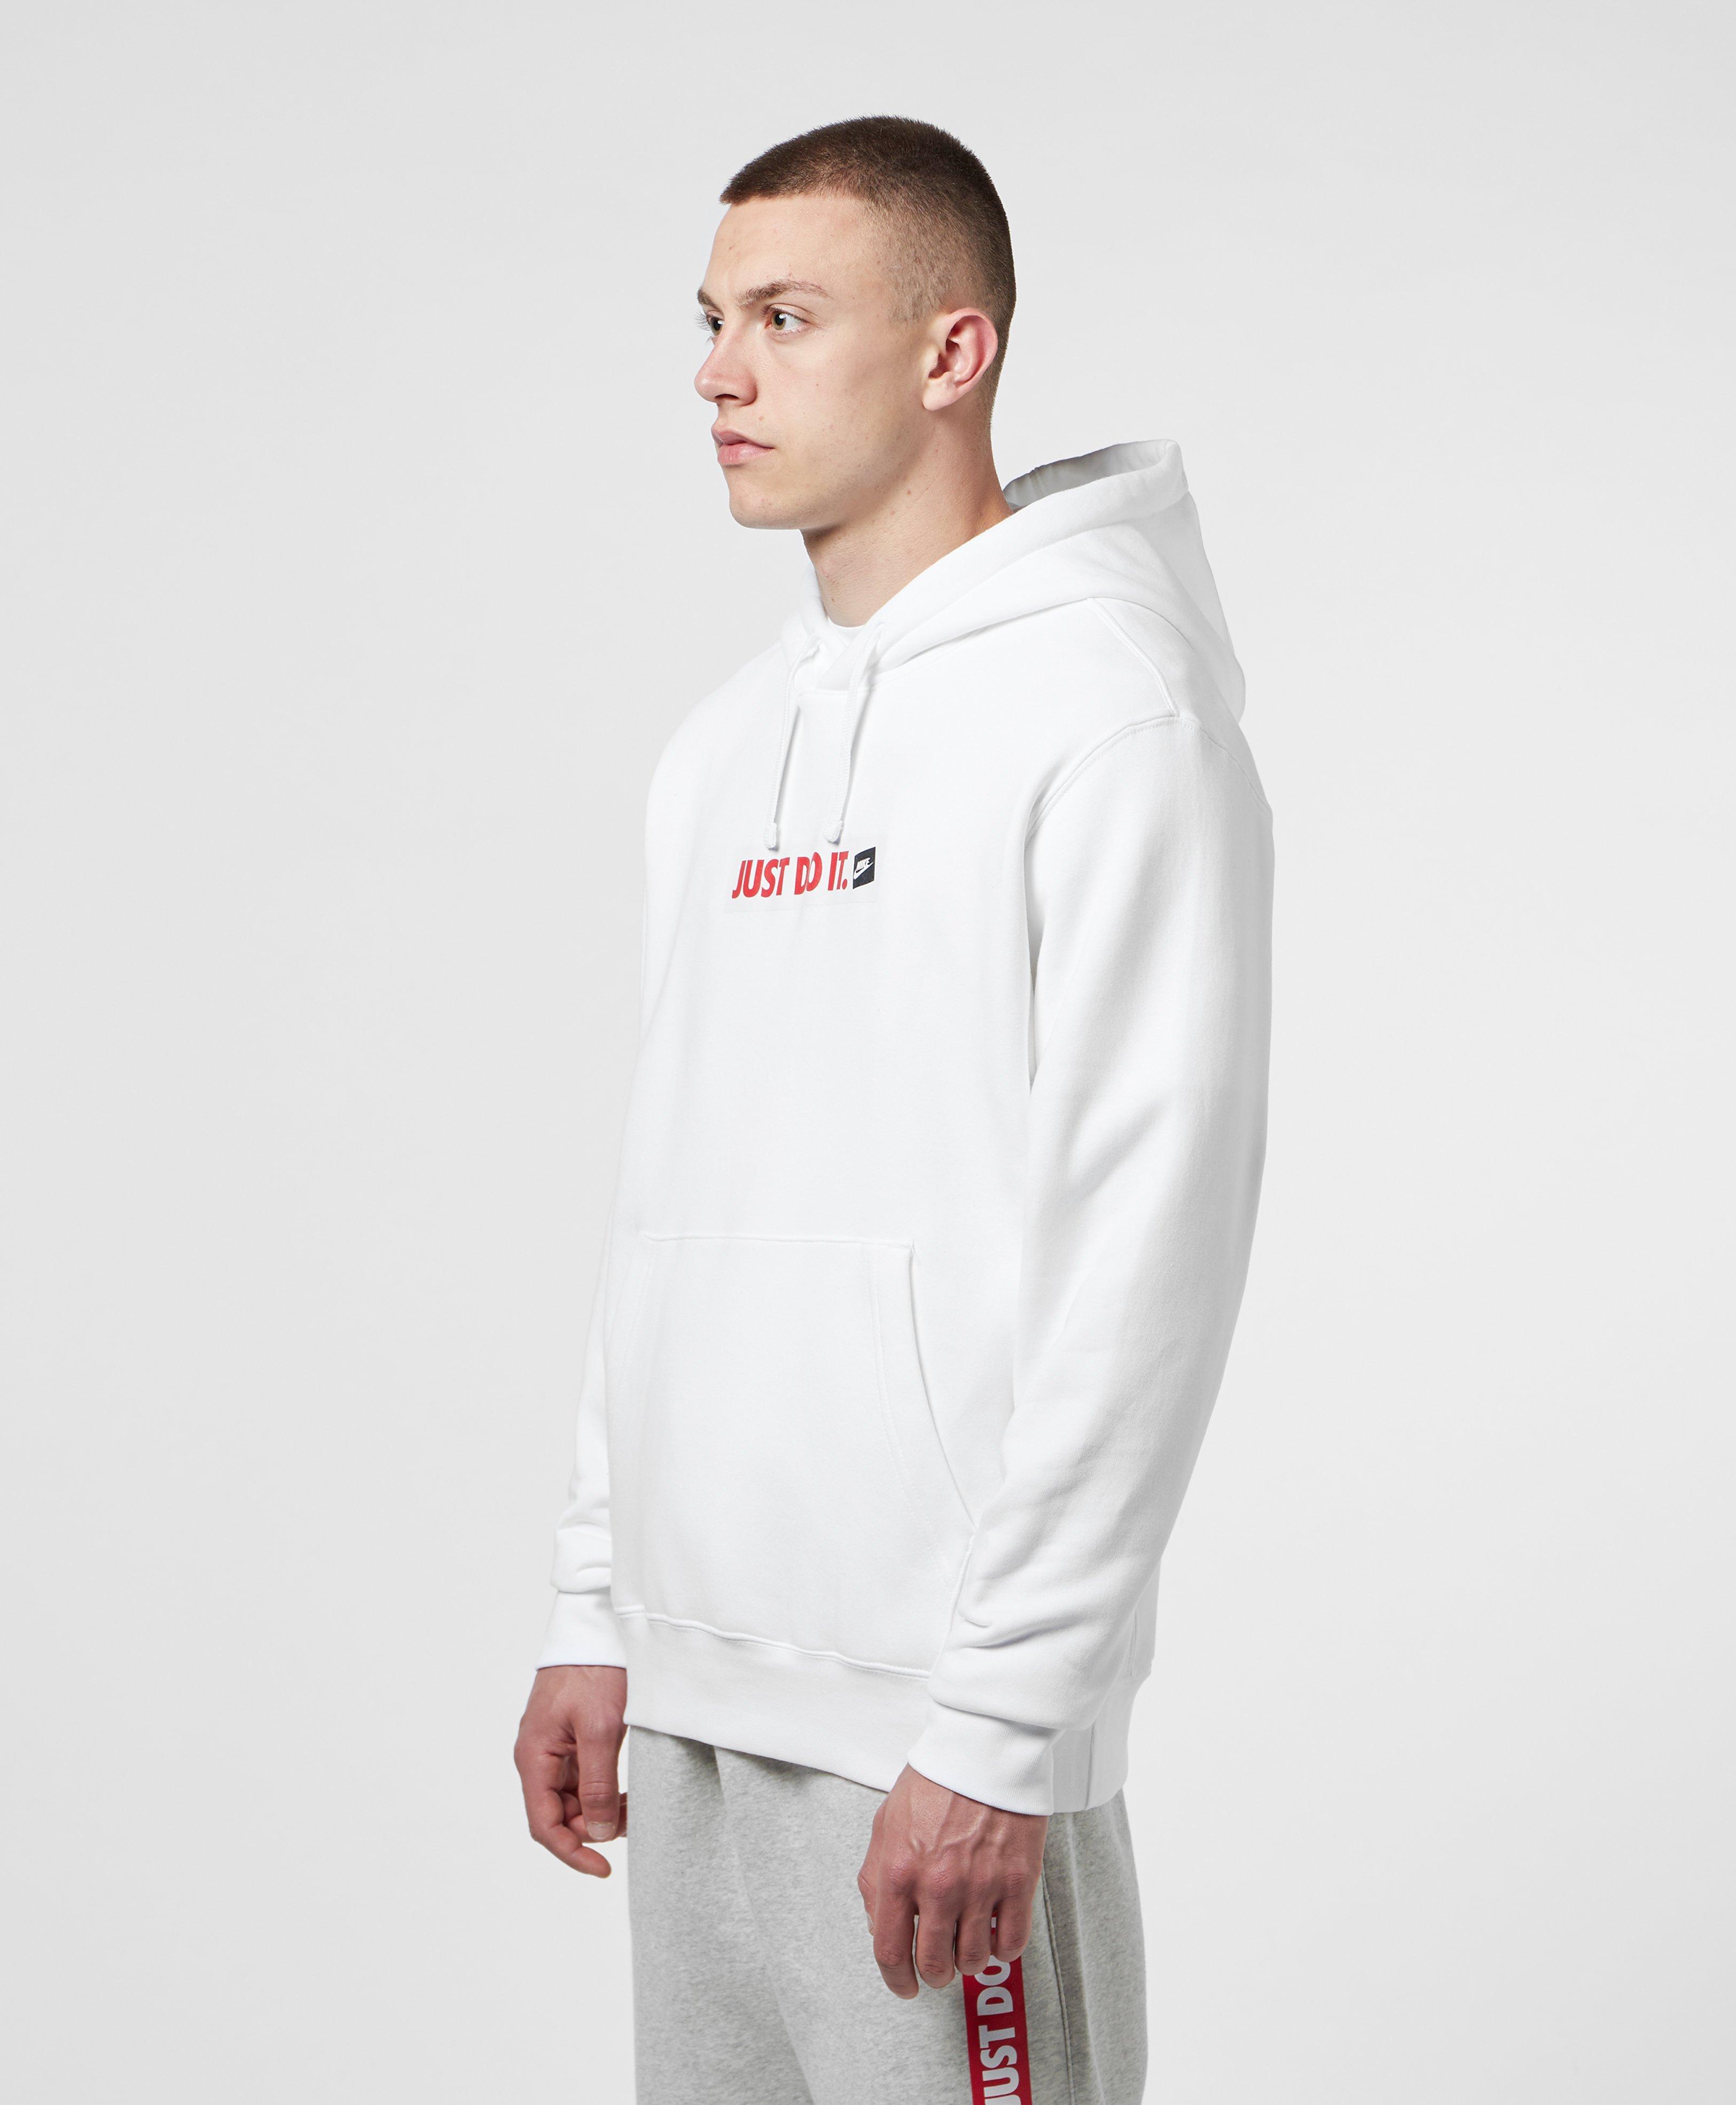 nike just do it embroidered hoodie